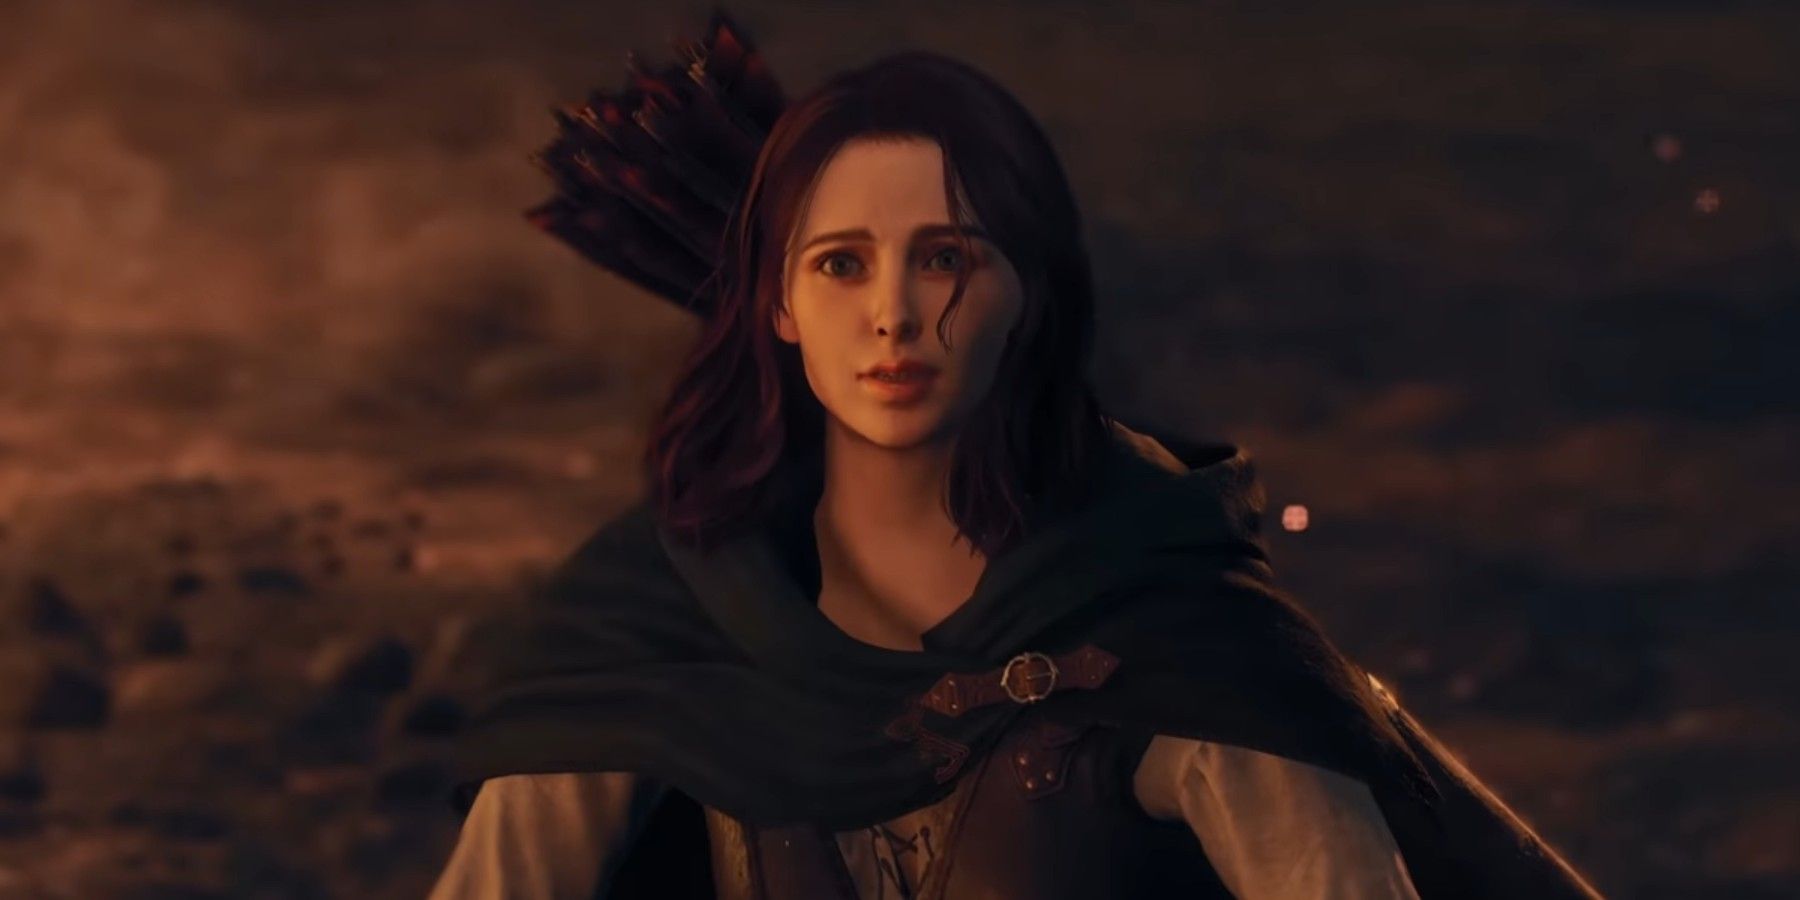 One Dragon’s Dogma 2 Character Looks A Lot Like Elden Ring’s Melina